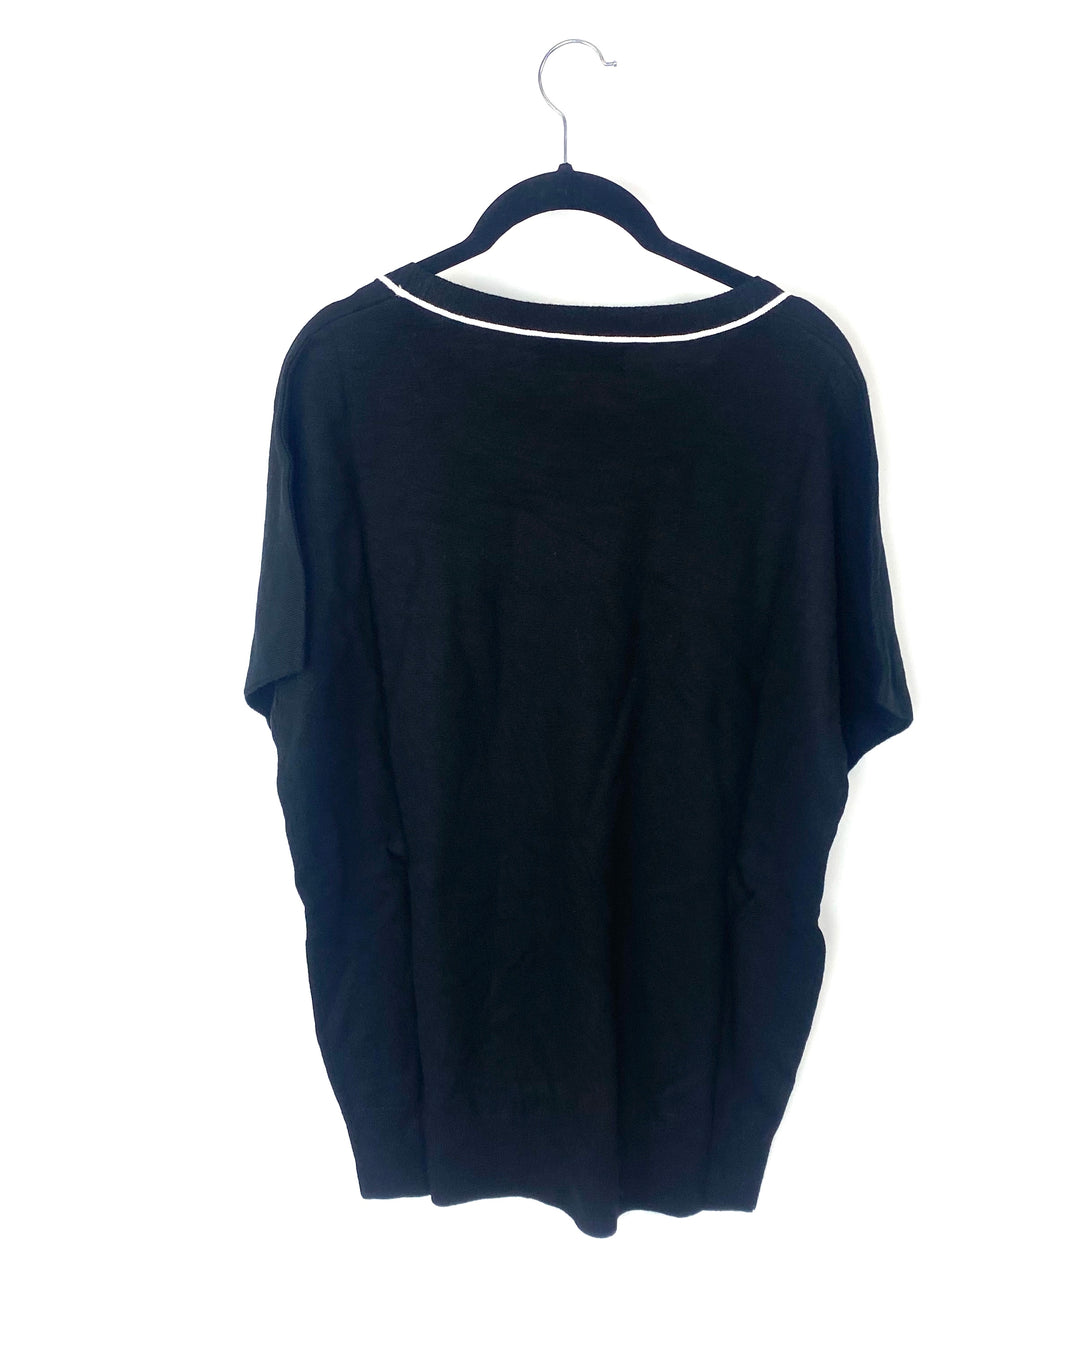 Black Knit  Top - Extra Small and Small